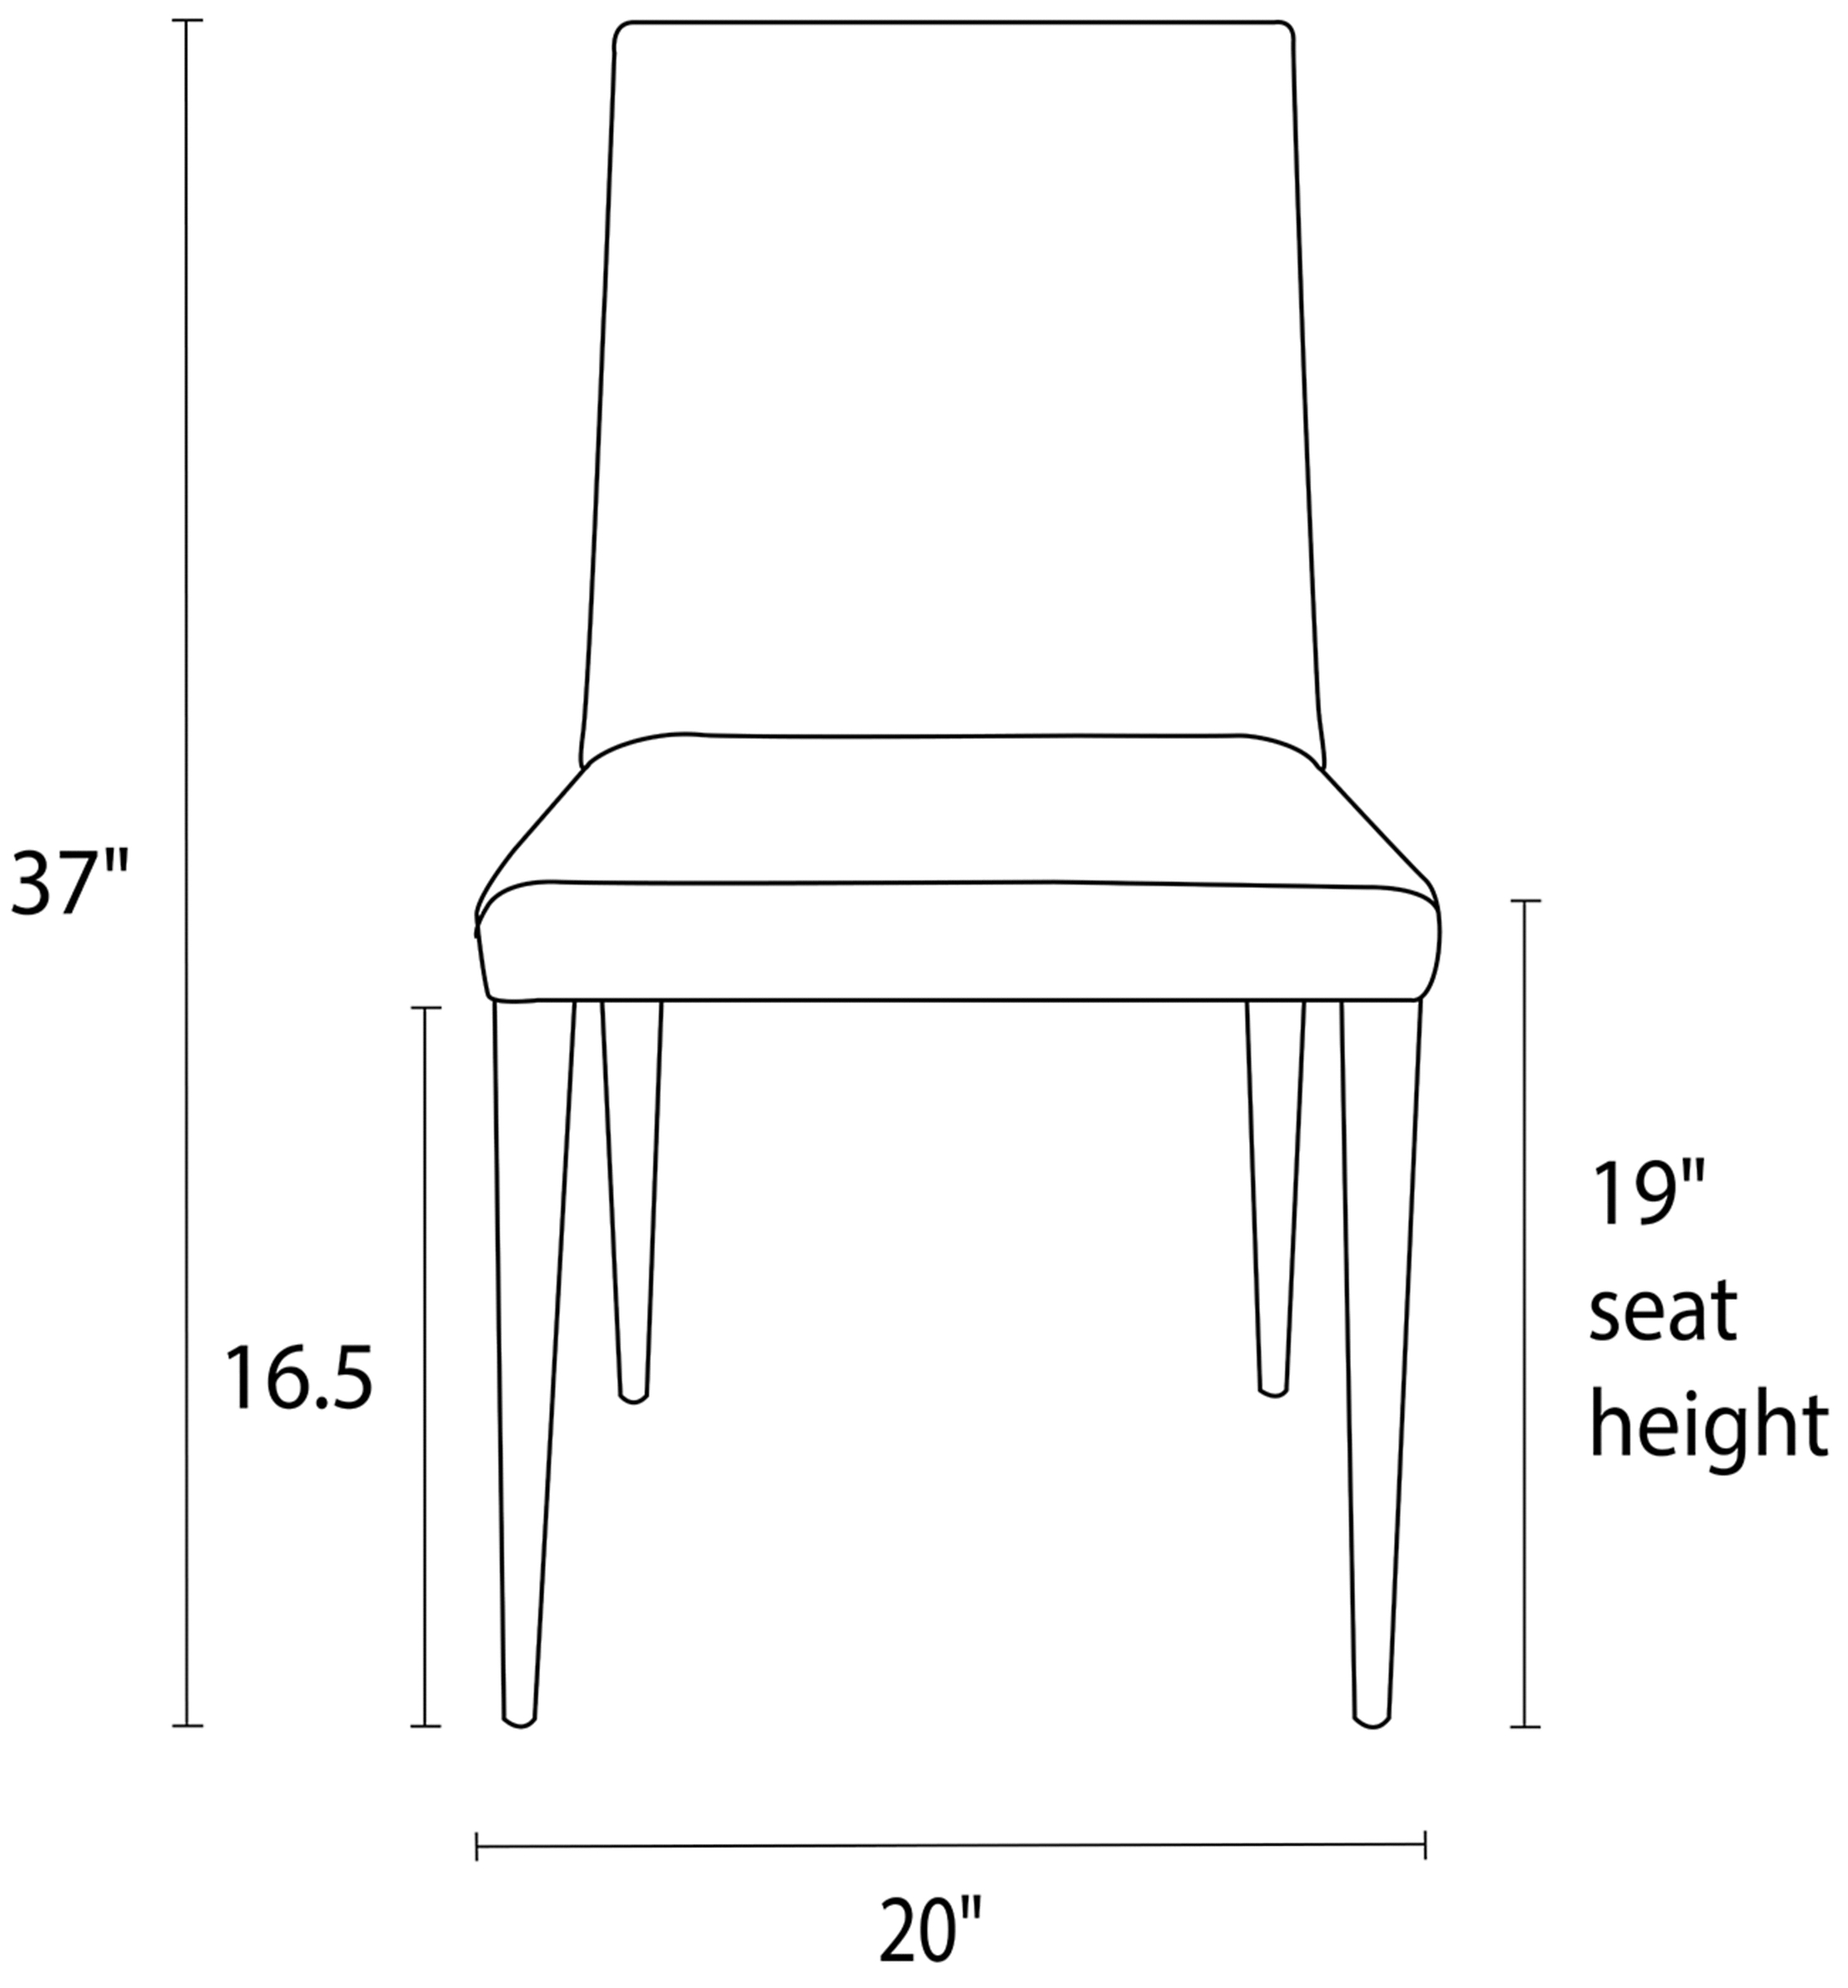 Front view dimension illustration of Ava high back chair.